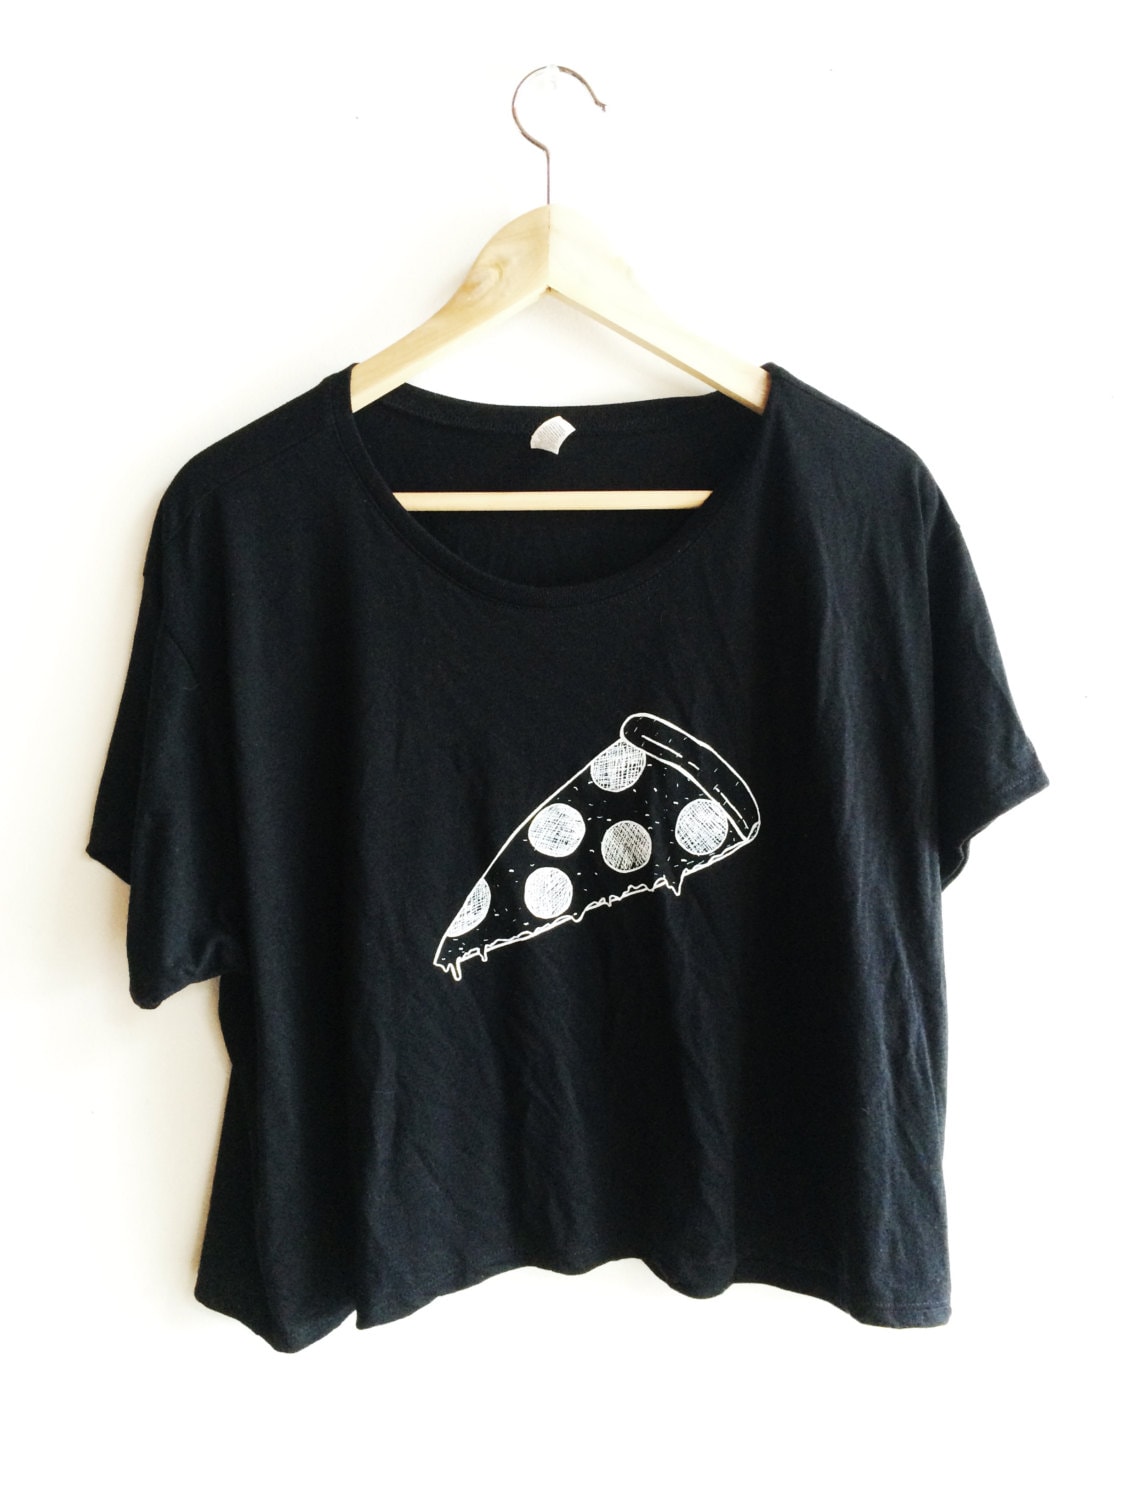 Pizza Shirt Screen Printed Crop Top Boxy Tee Foodie Gift - Etsy